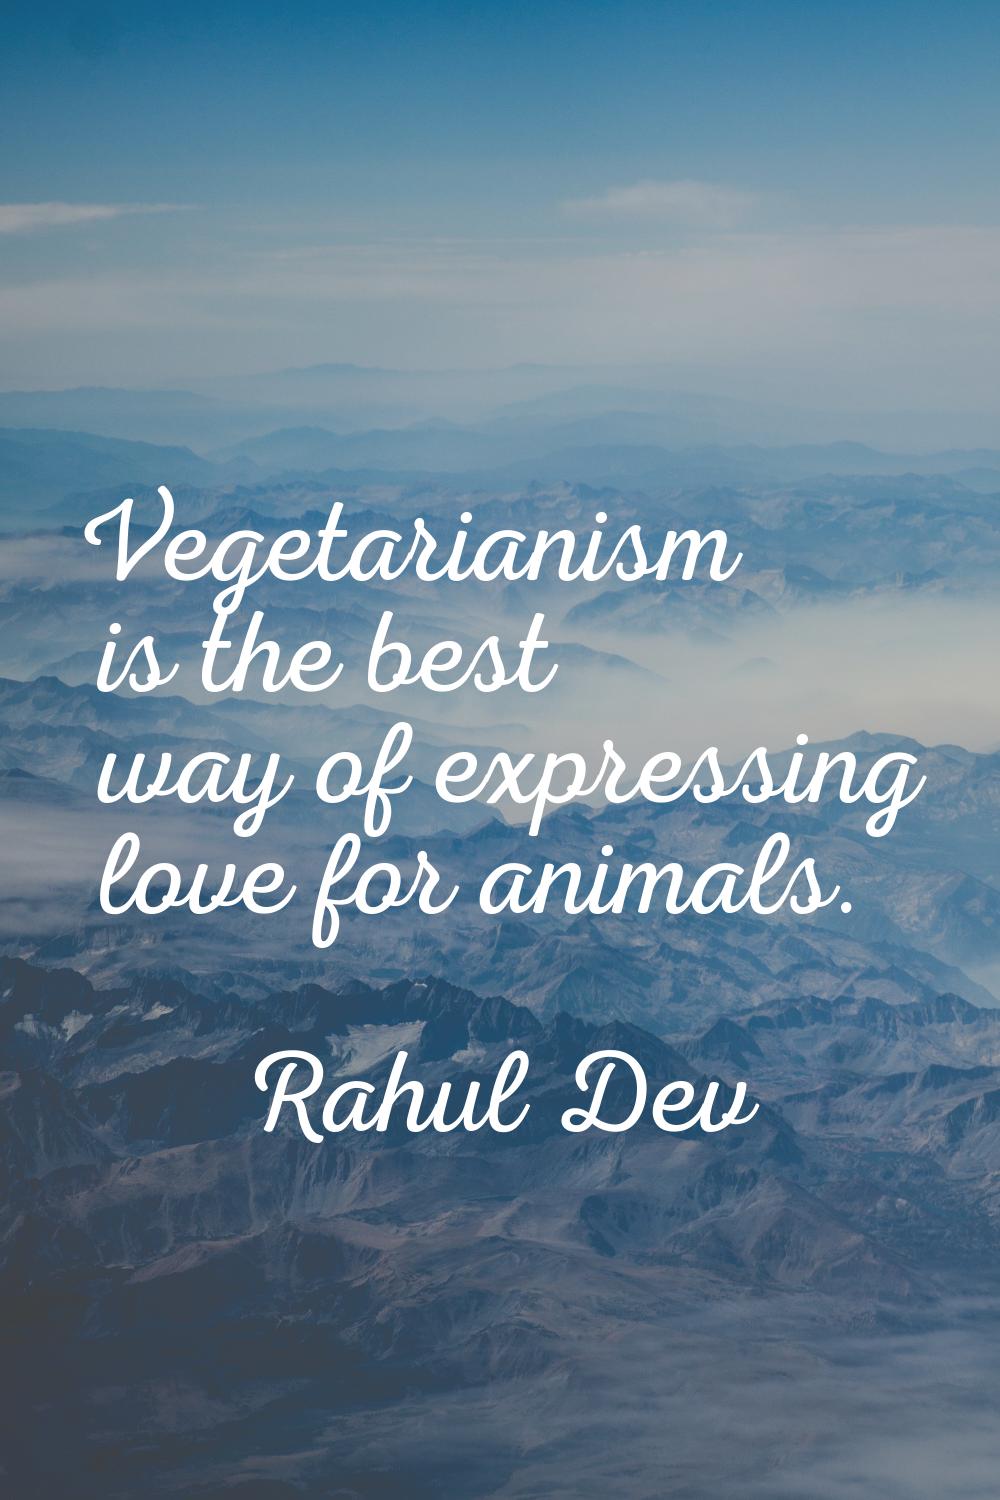 Vegetarianism is the best way of expressing love for animals.